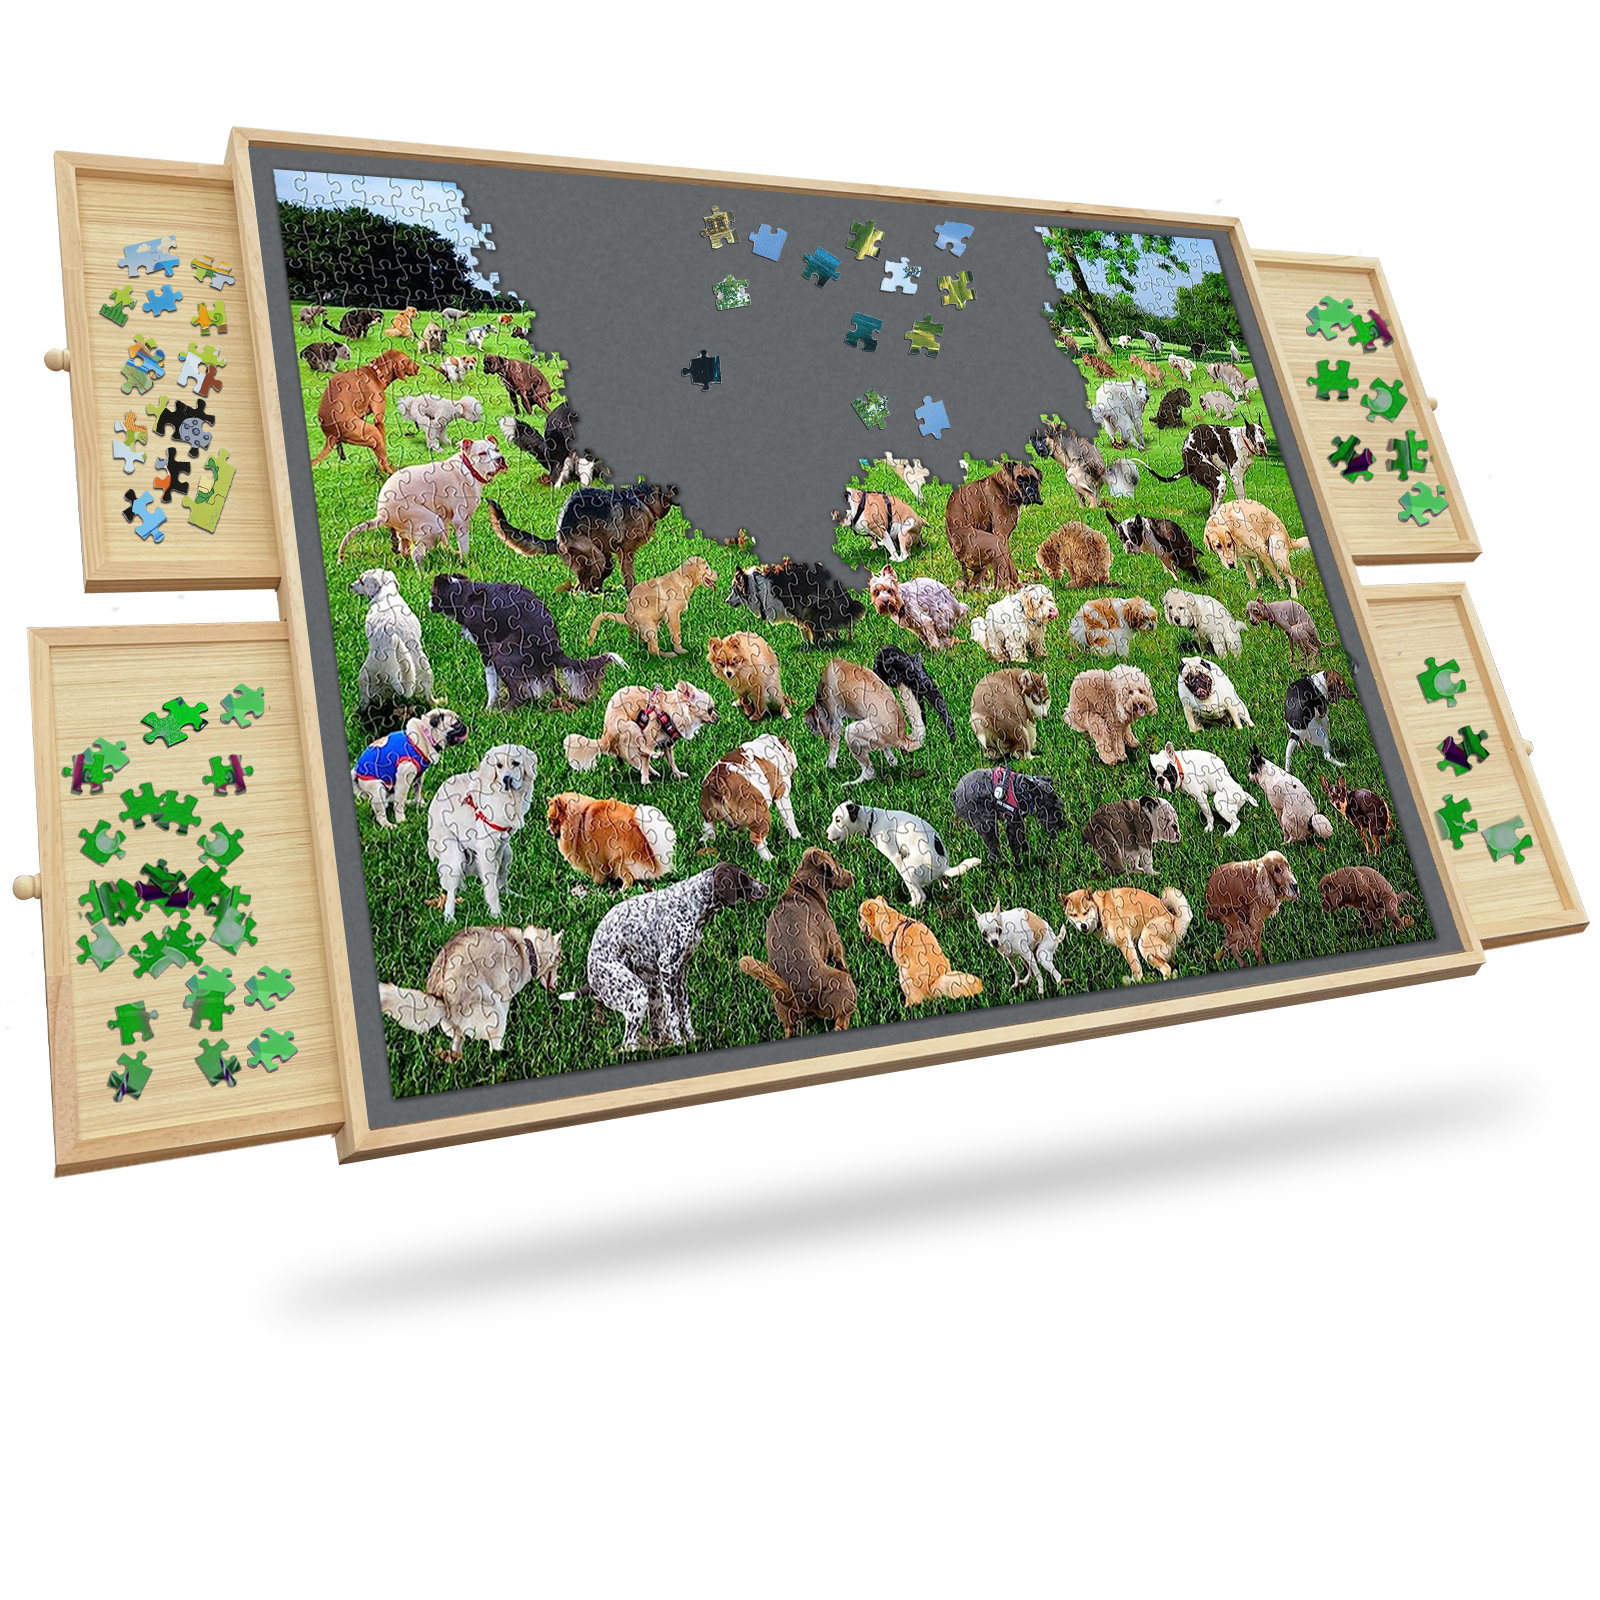 SkyMall 1000 Piece Puzzle Board  Premium Wooden Jigsaw Puzzle